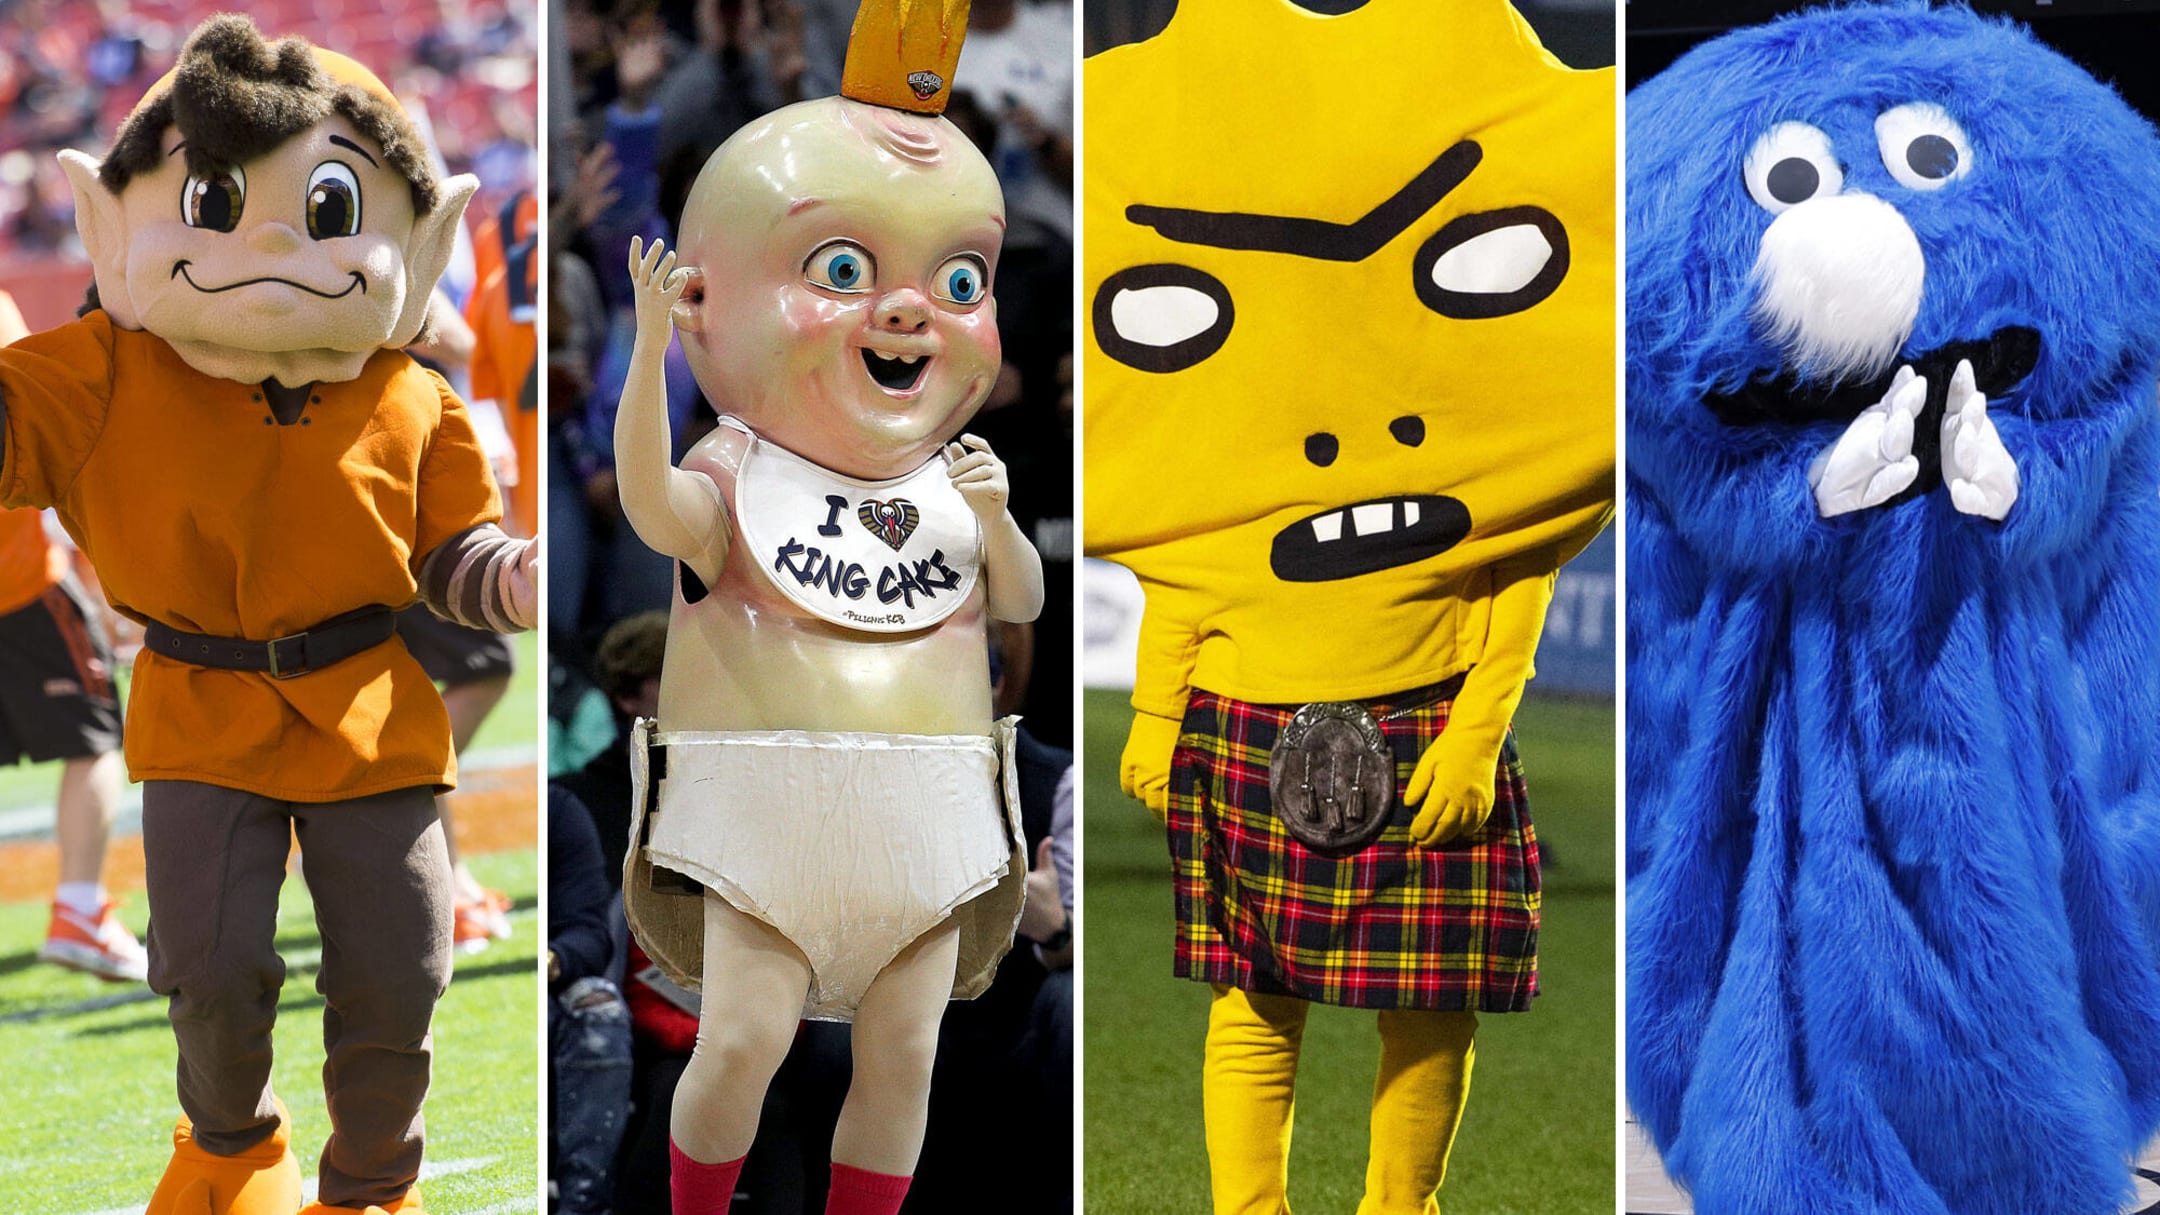 Want to meet an NFL mascot? We can help you see them all - Los